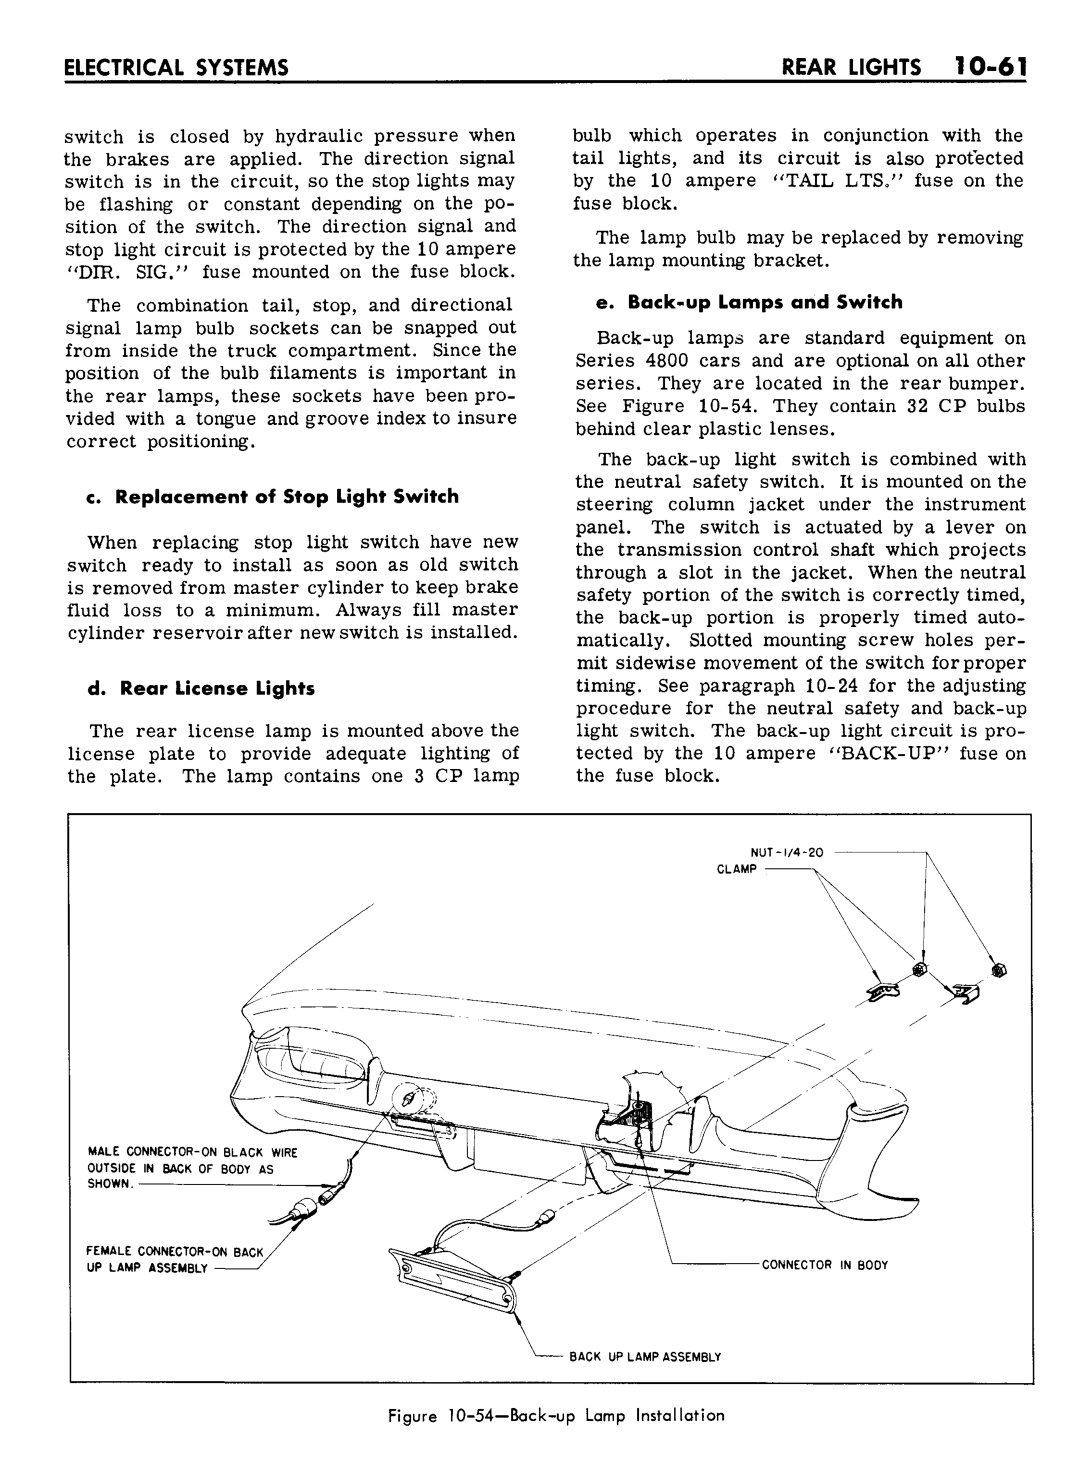 n_10 1961 Buick Shop Manual - Electrical Systems-061-061.jpg